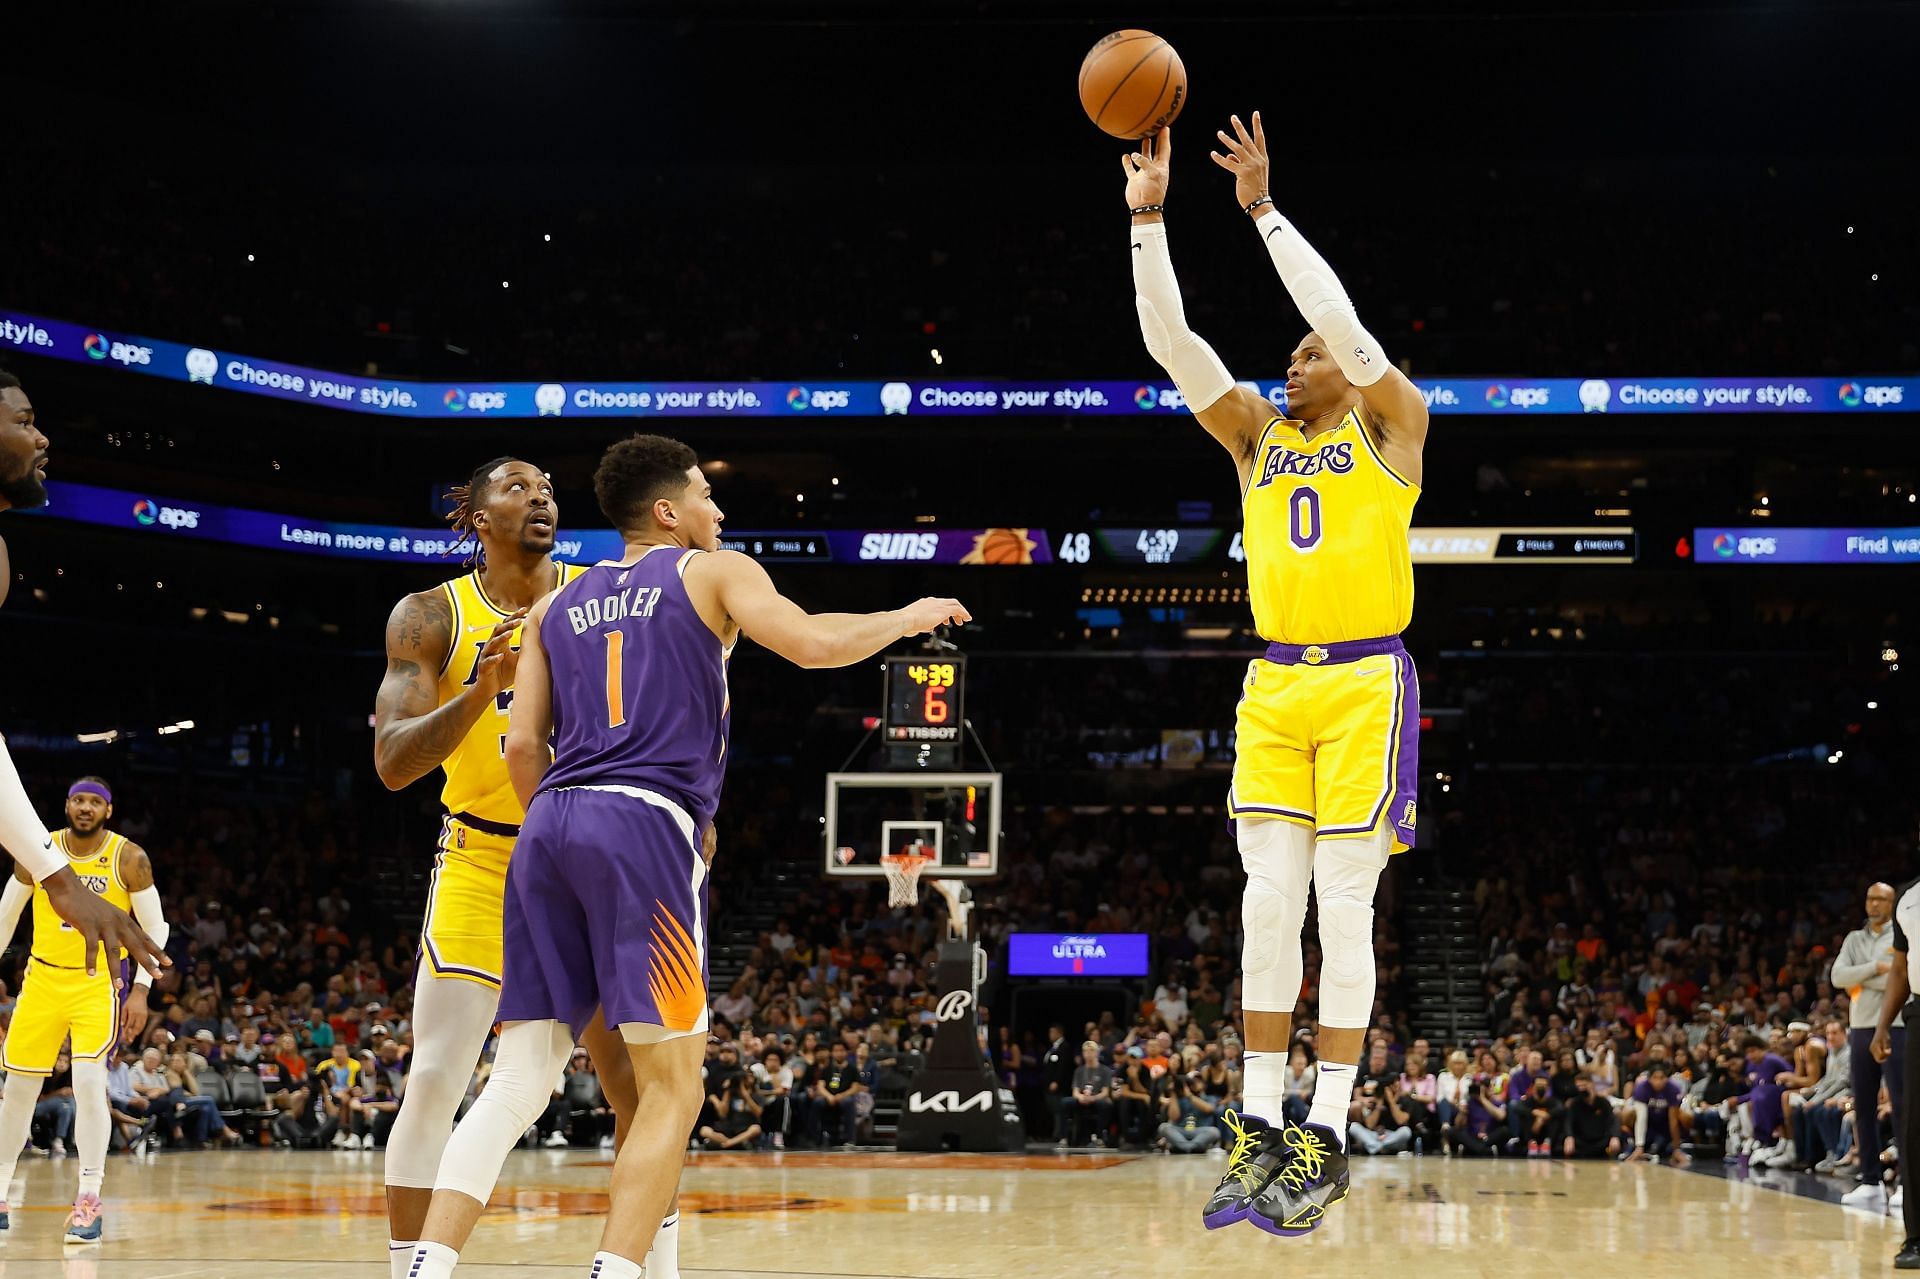 Russell Westbrook of the LA Lakers shoots over Devin Booker of the Phoenix Suns.